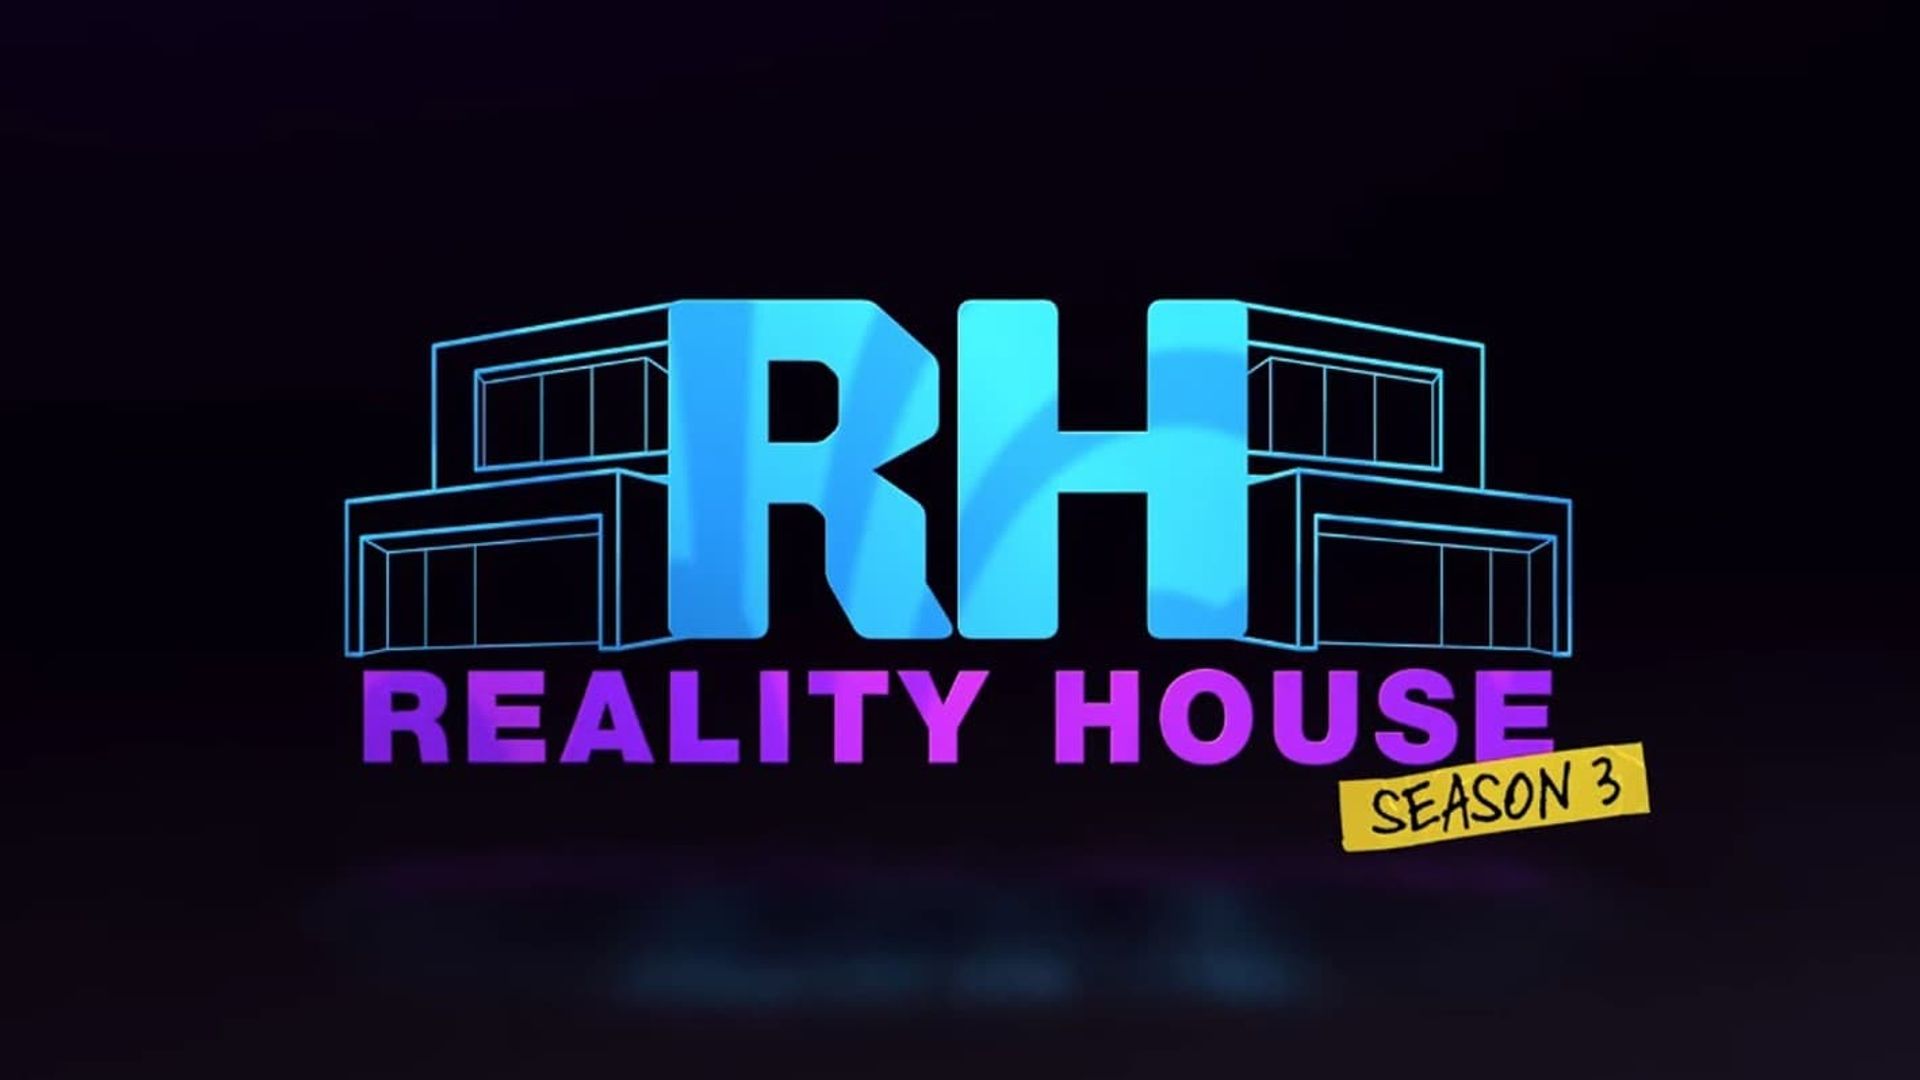 The Reality House background